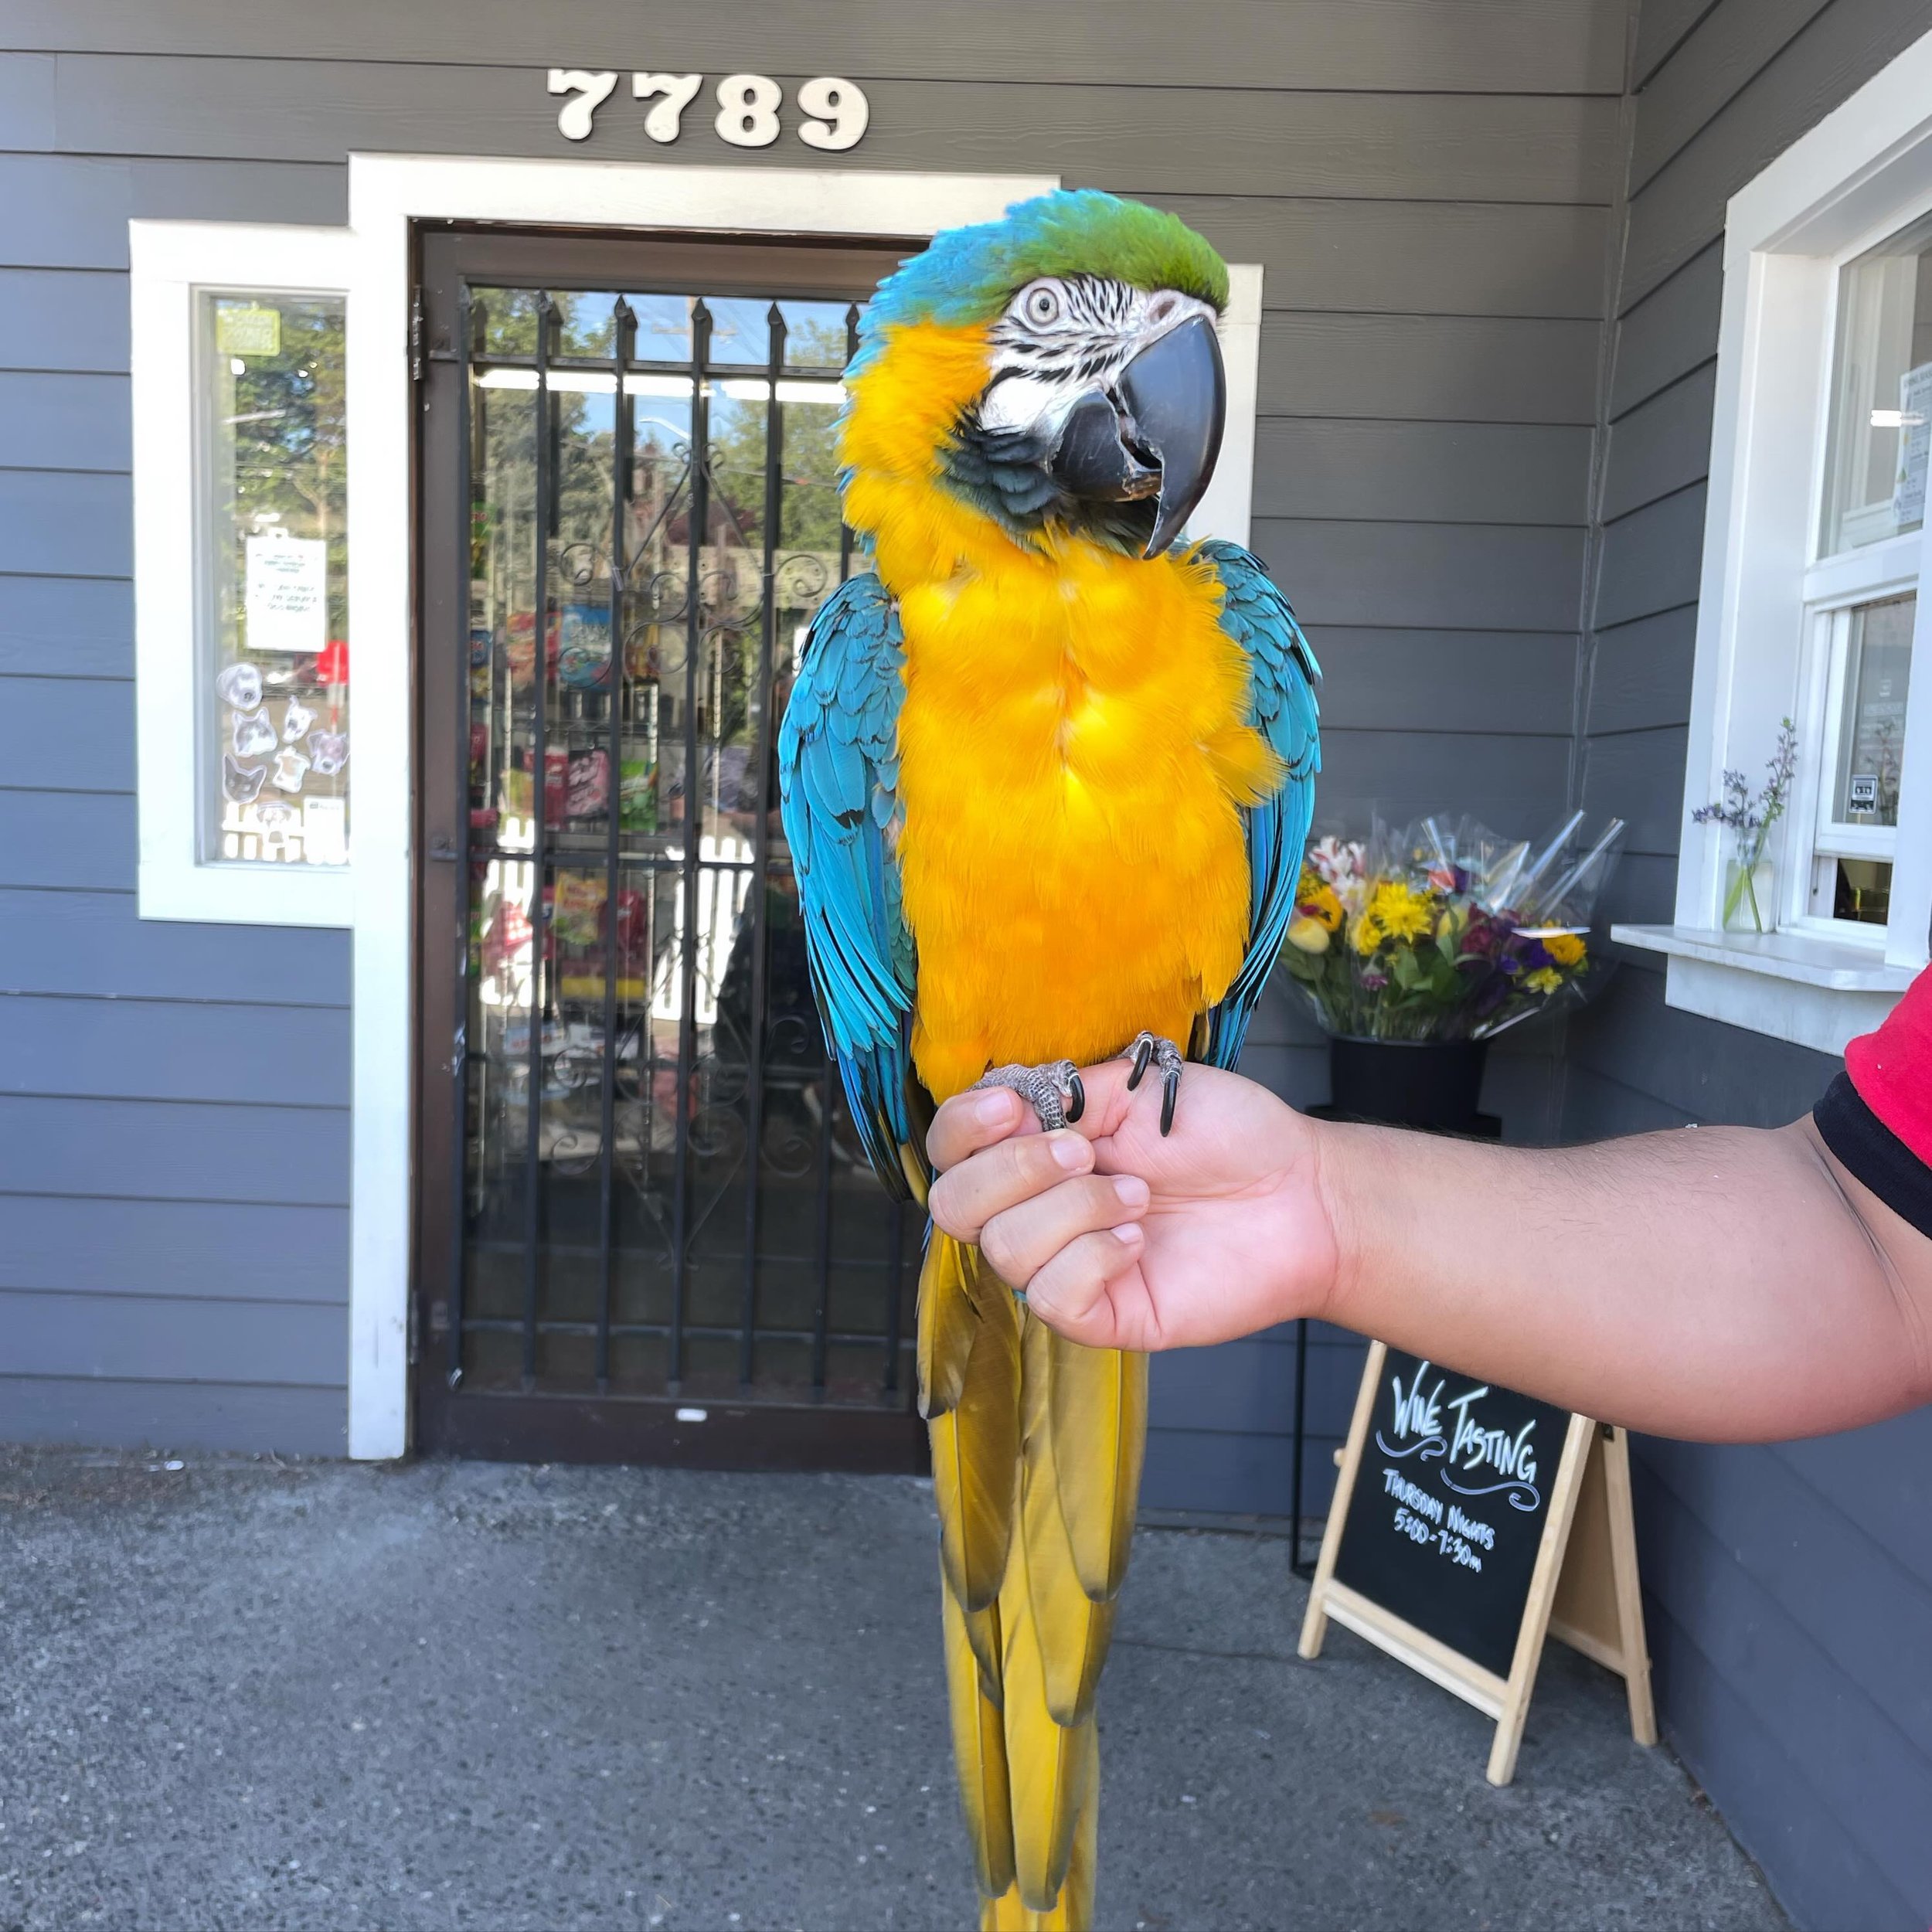 Everyone comes out for the food trucks on Thursdays! Thanks for hanging out at the corner store, Saki!

#🦜